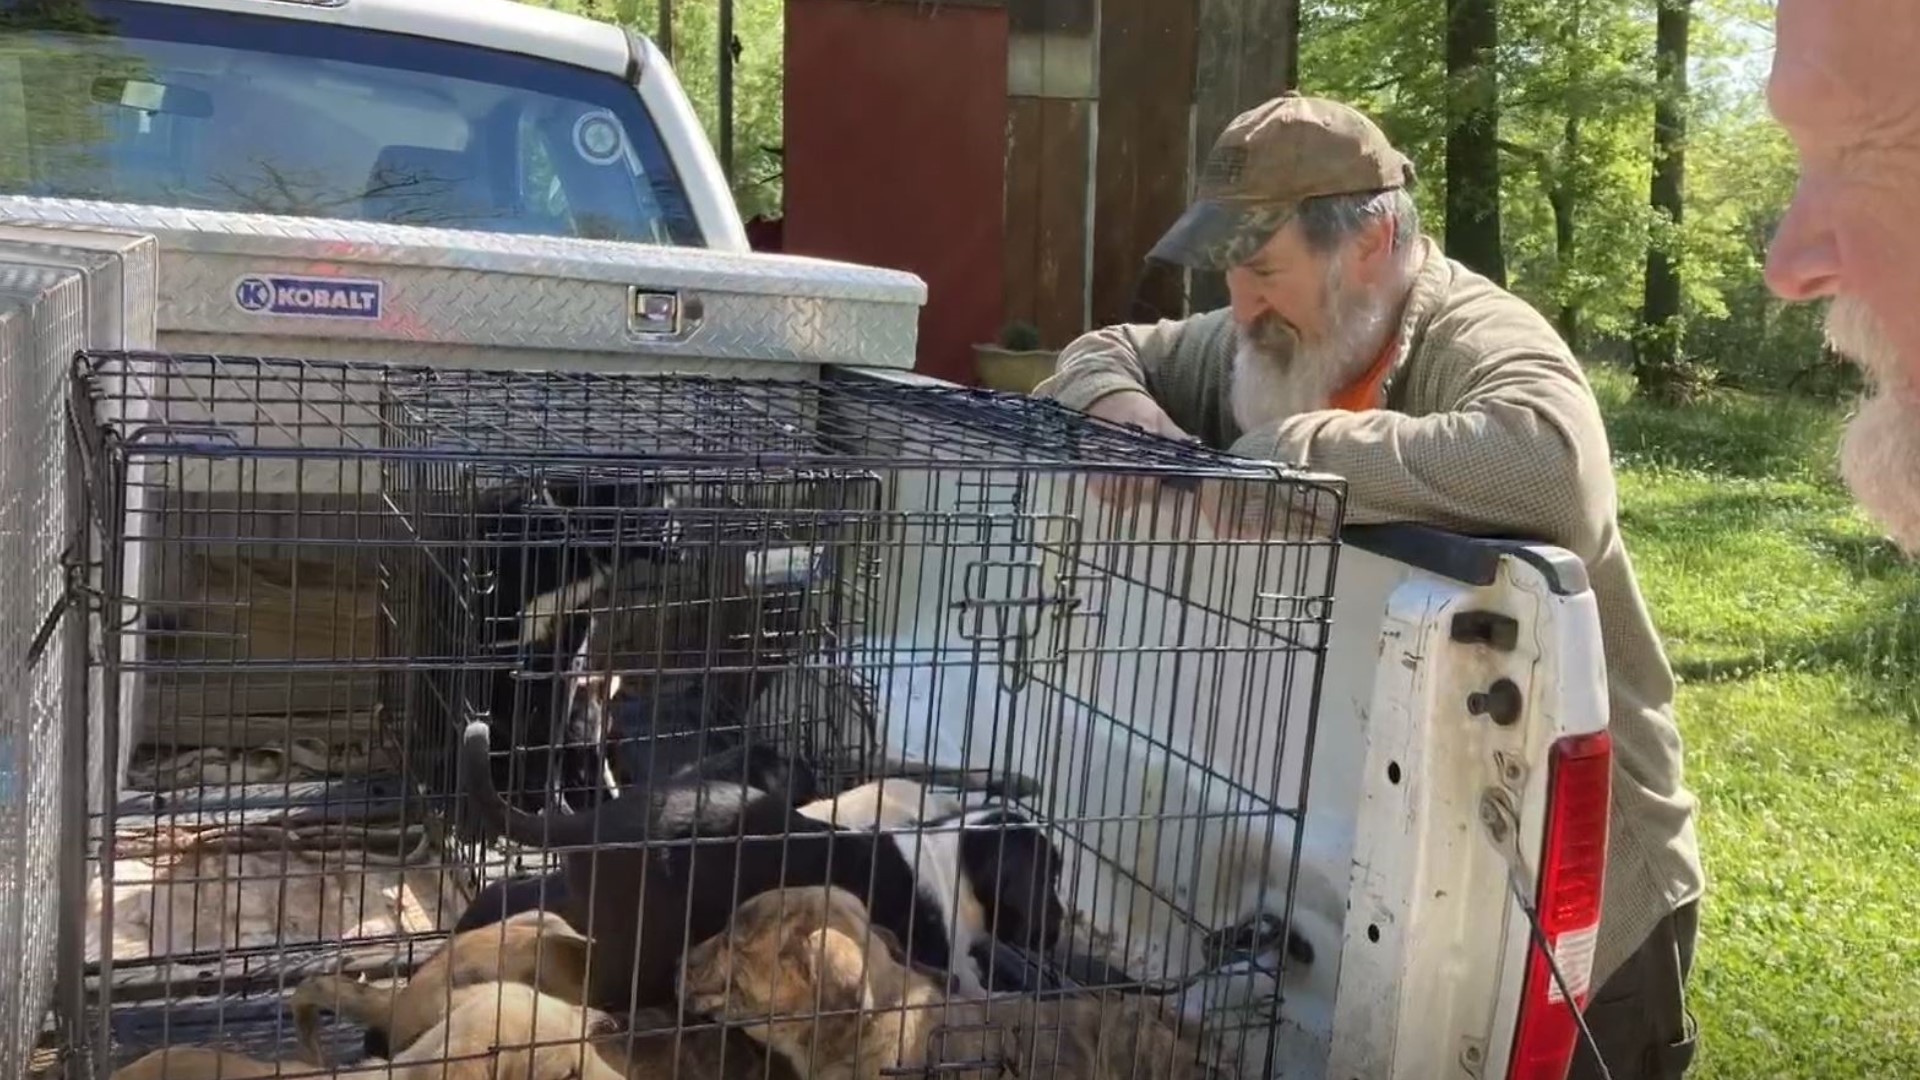 According to the 2021 Census Bureau, more than 6,000 people live in Hancock County, but they don't have an animal shelter or animal control.